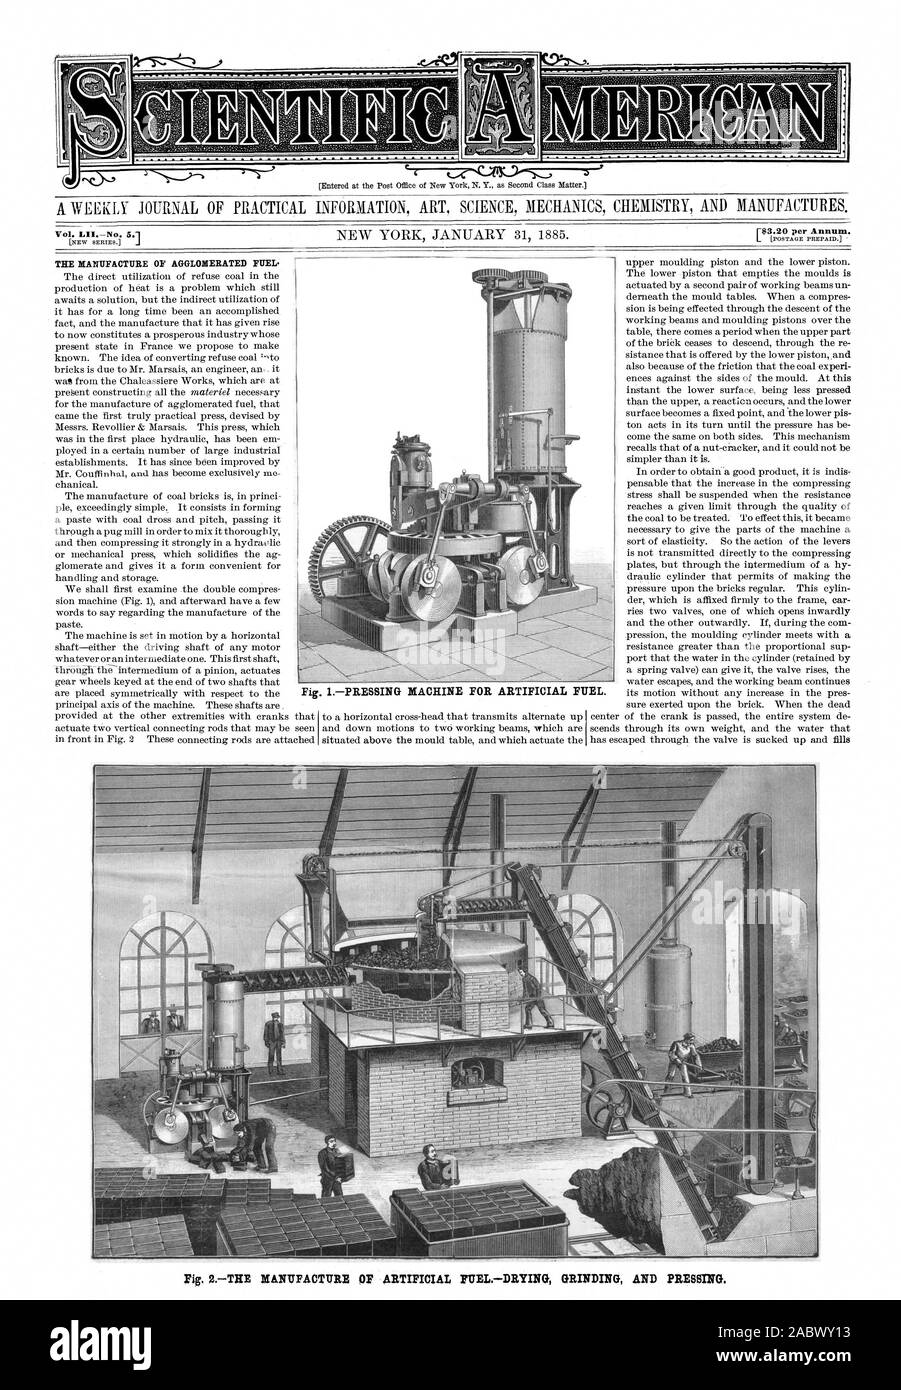 Fig. IPRESSING MACHINE FOR ARTIFICIAL FUEL. THE MANDEACTURE OF AGGLOMERATED FUEL., scientific american, 1885-01-31 Stock Photo